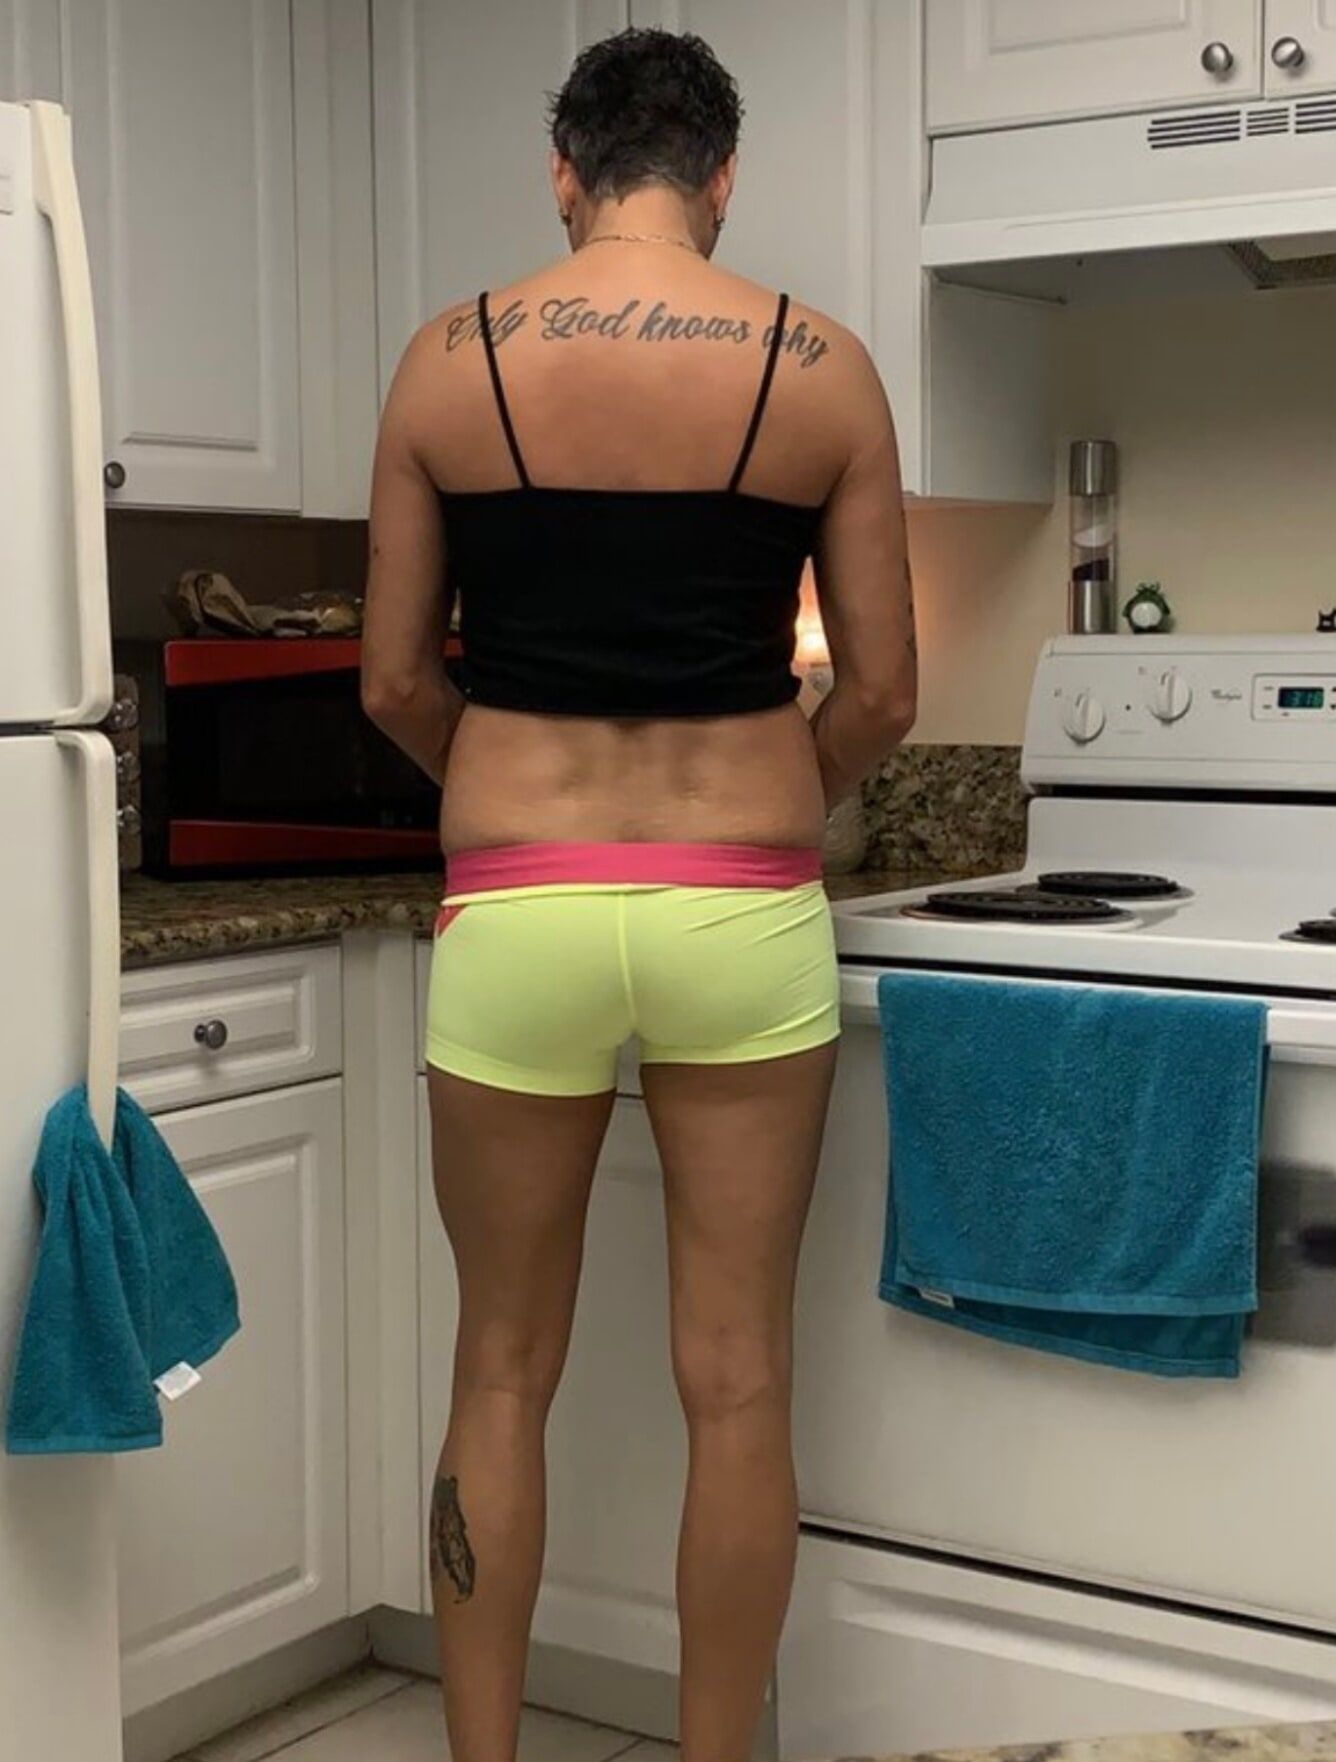 Infraction: CWC Cooking while crossdressed #4